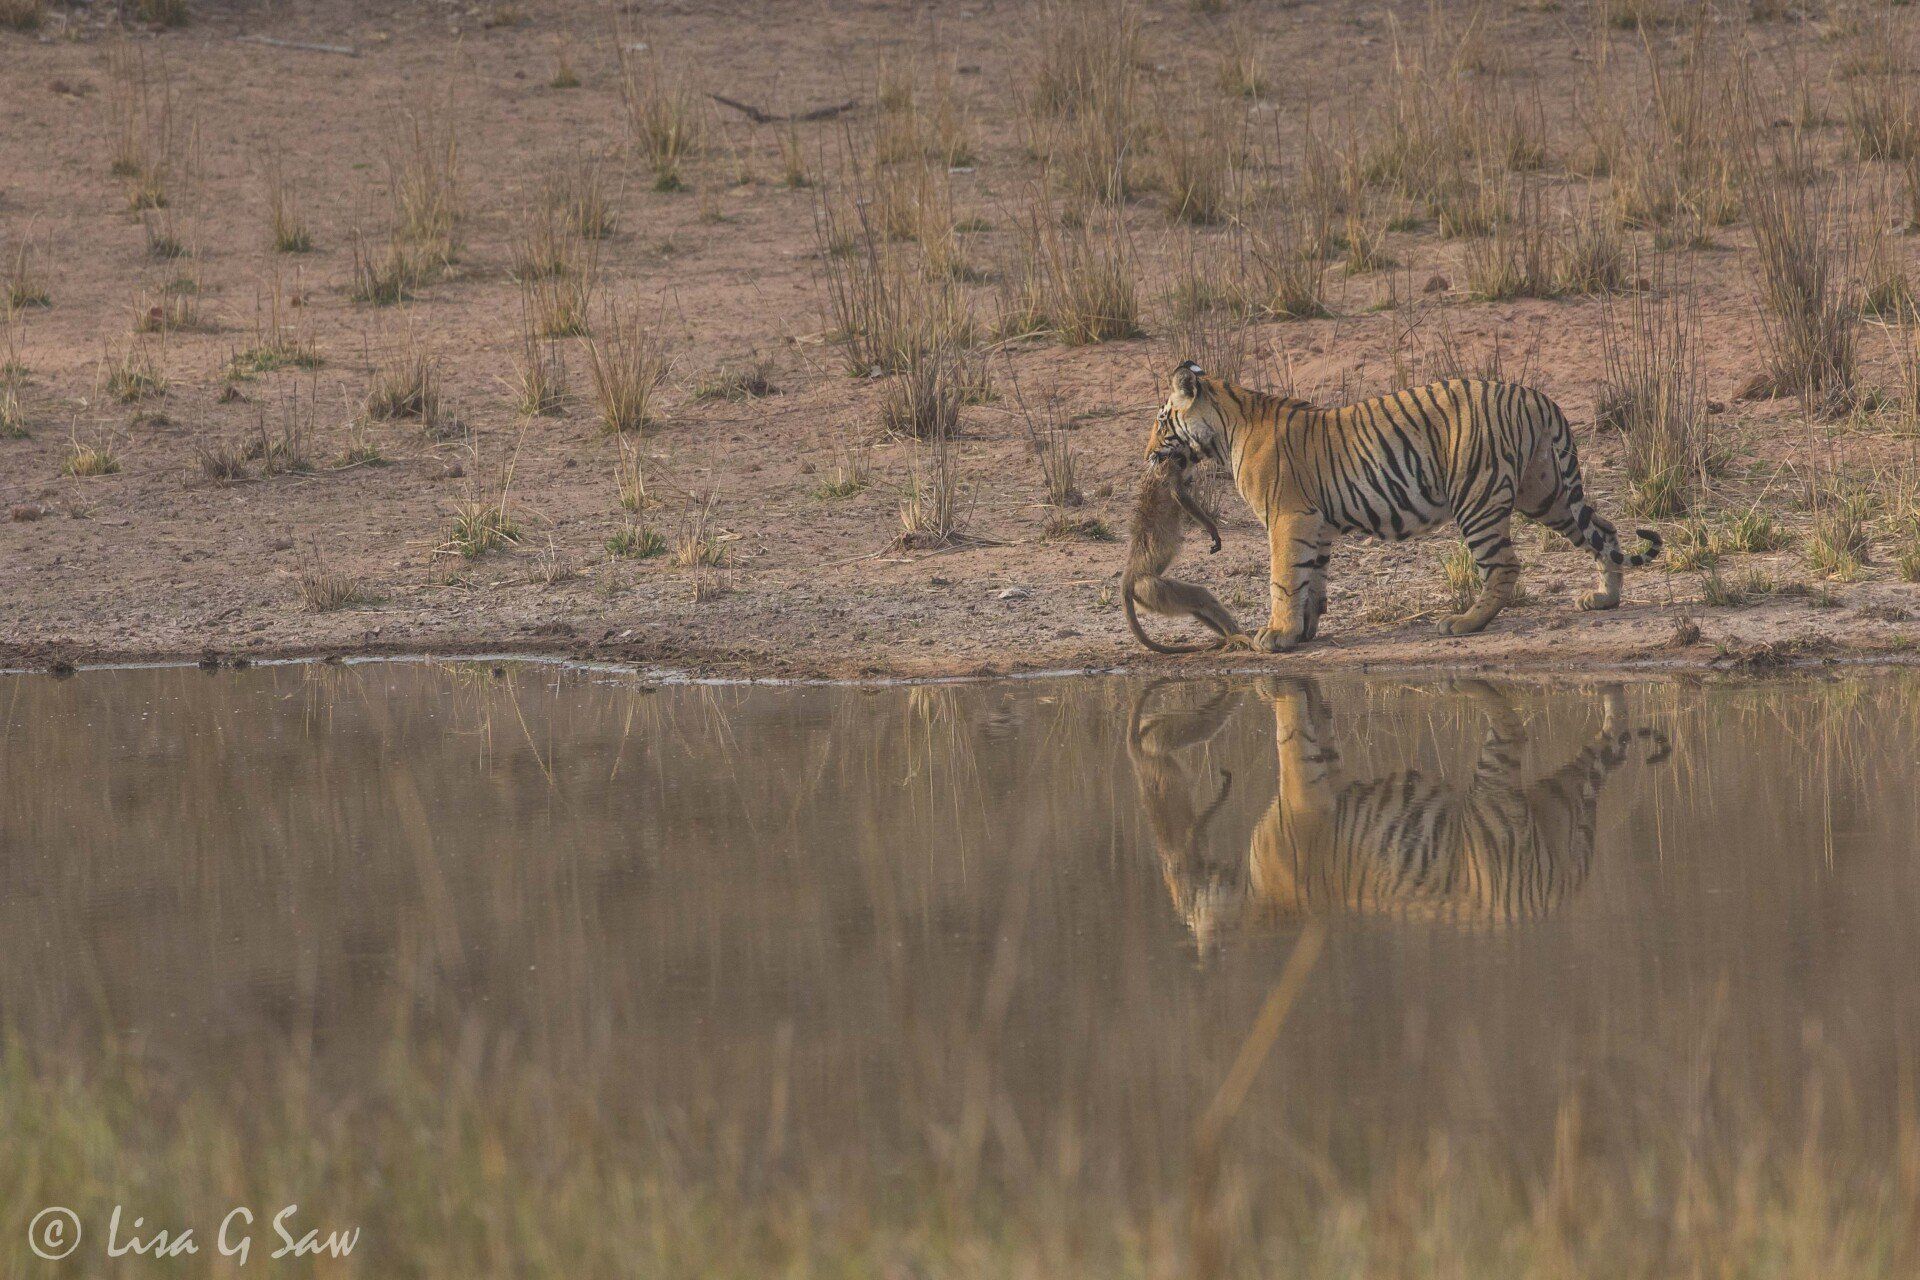 Tiger with a dead langur in its mouth reflected in water